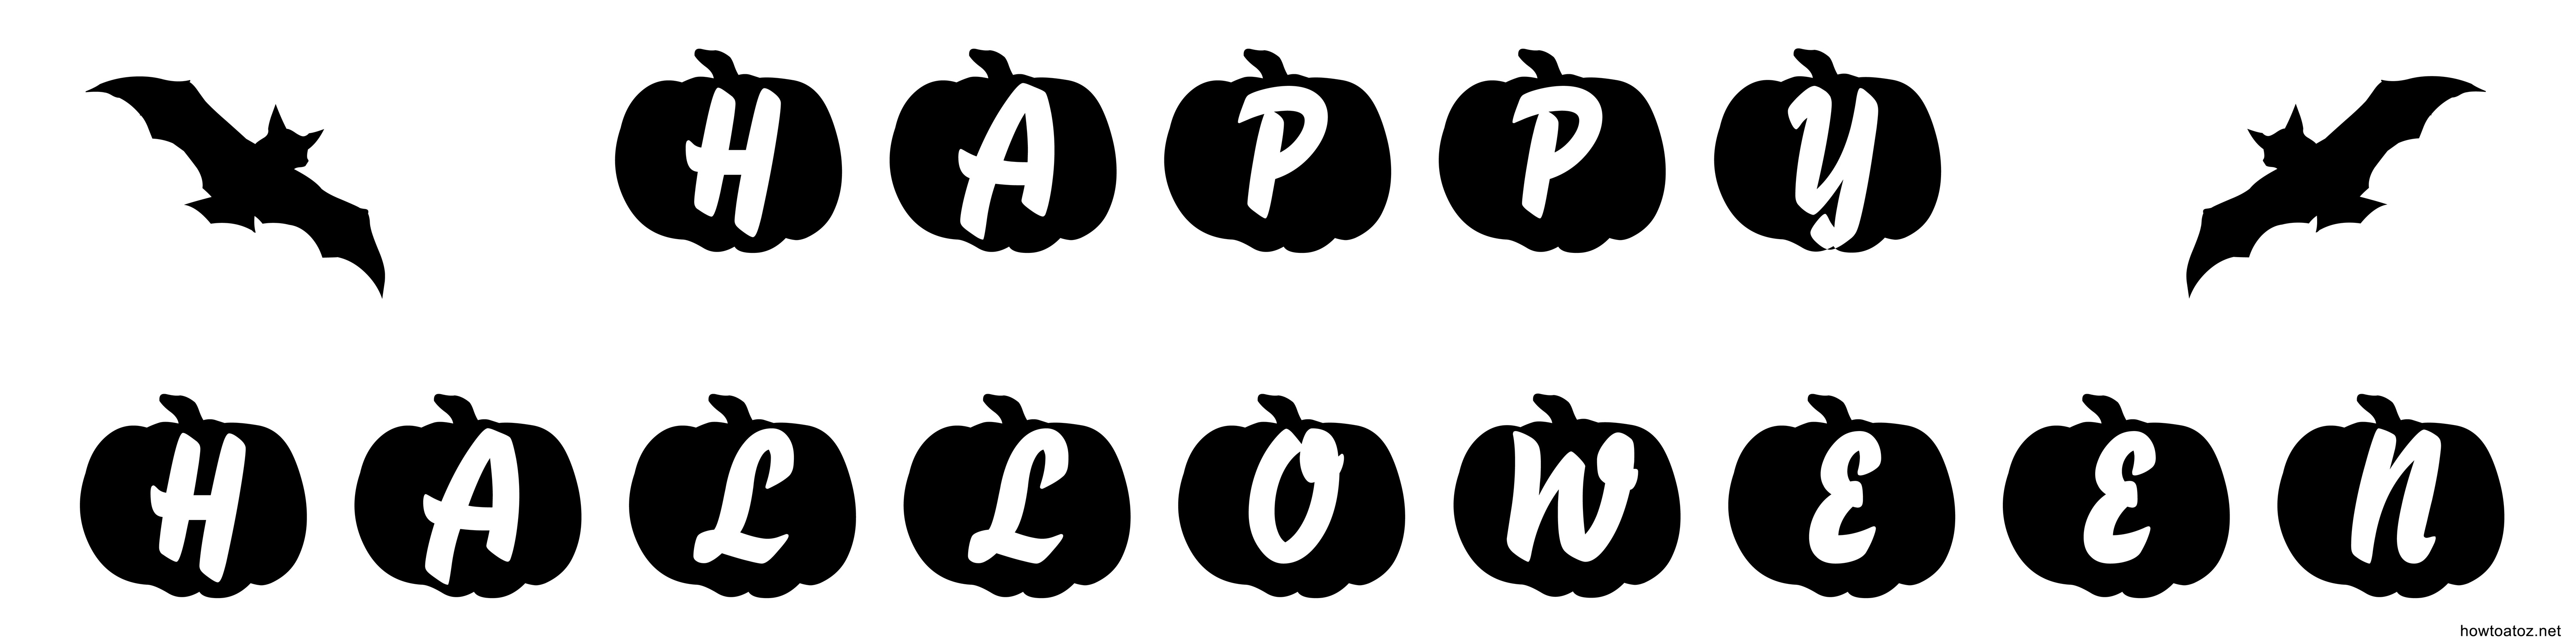 halloween-decoration-stencils-and-templates-how-to-a-to-z